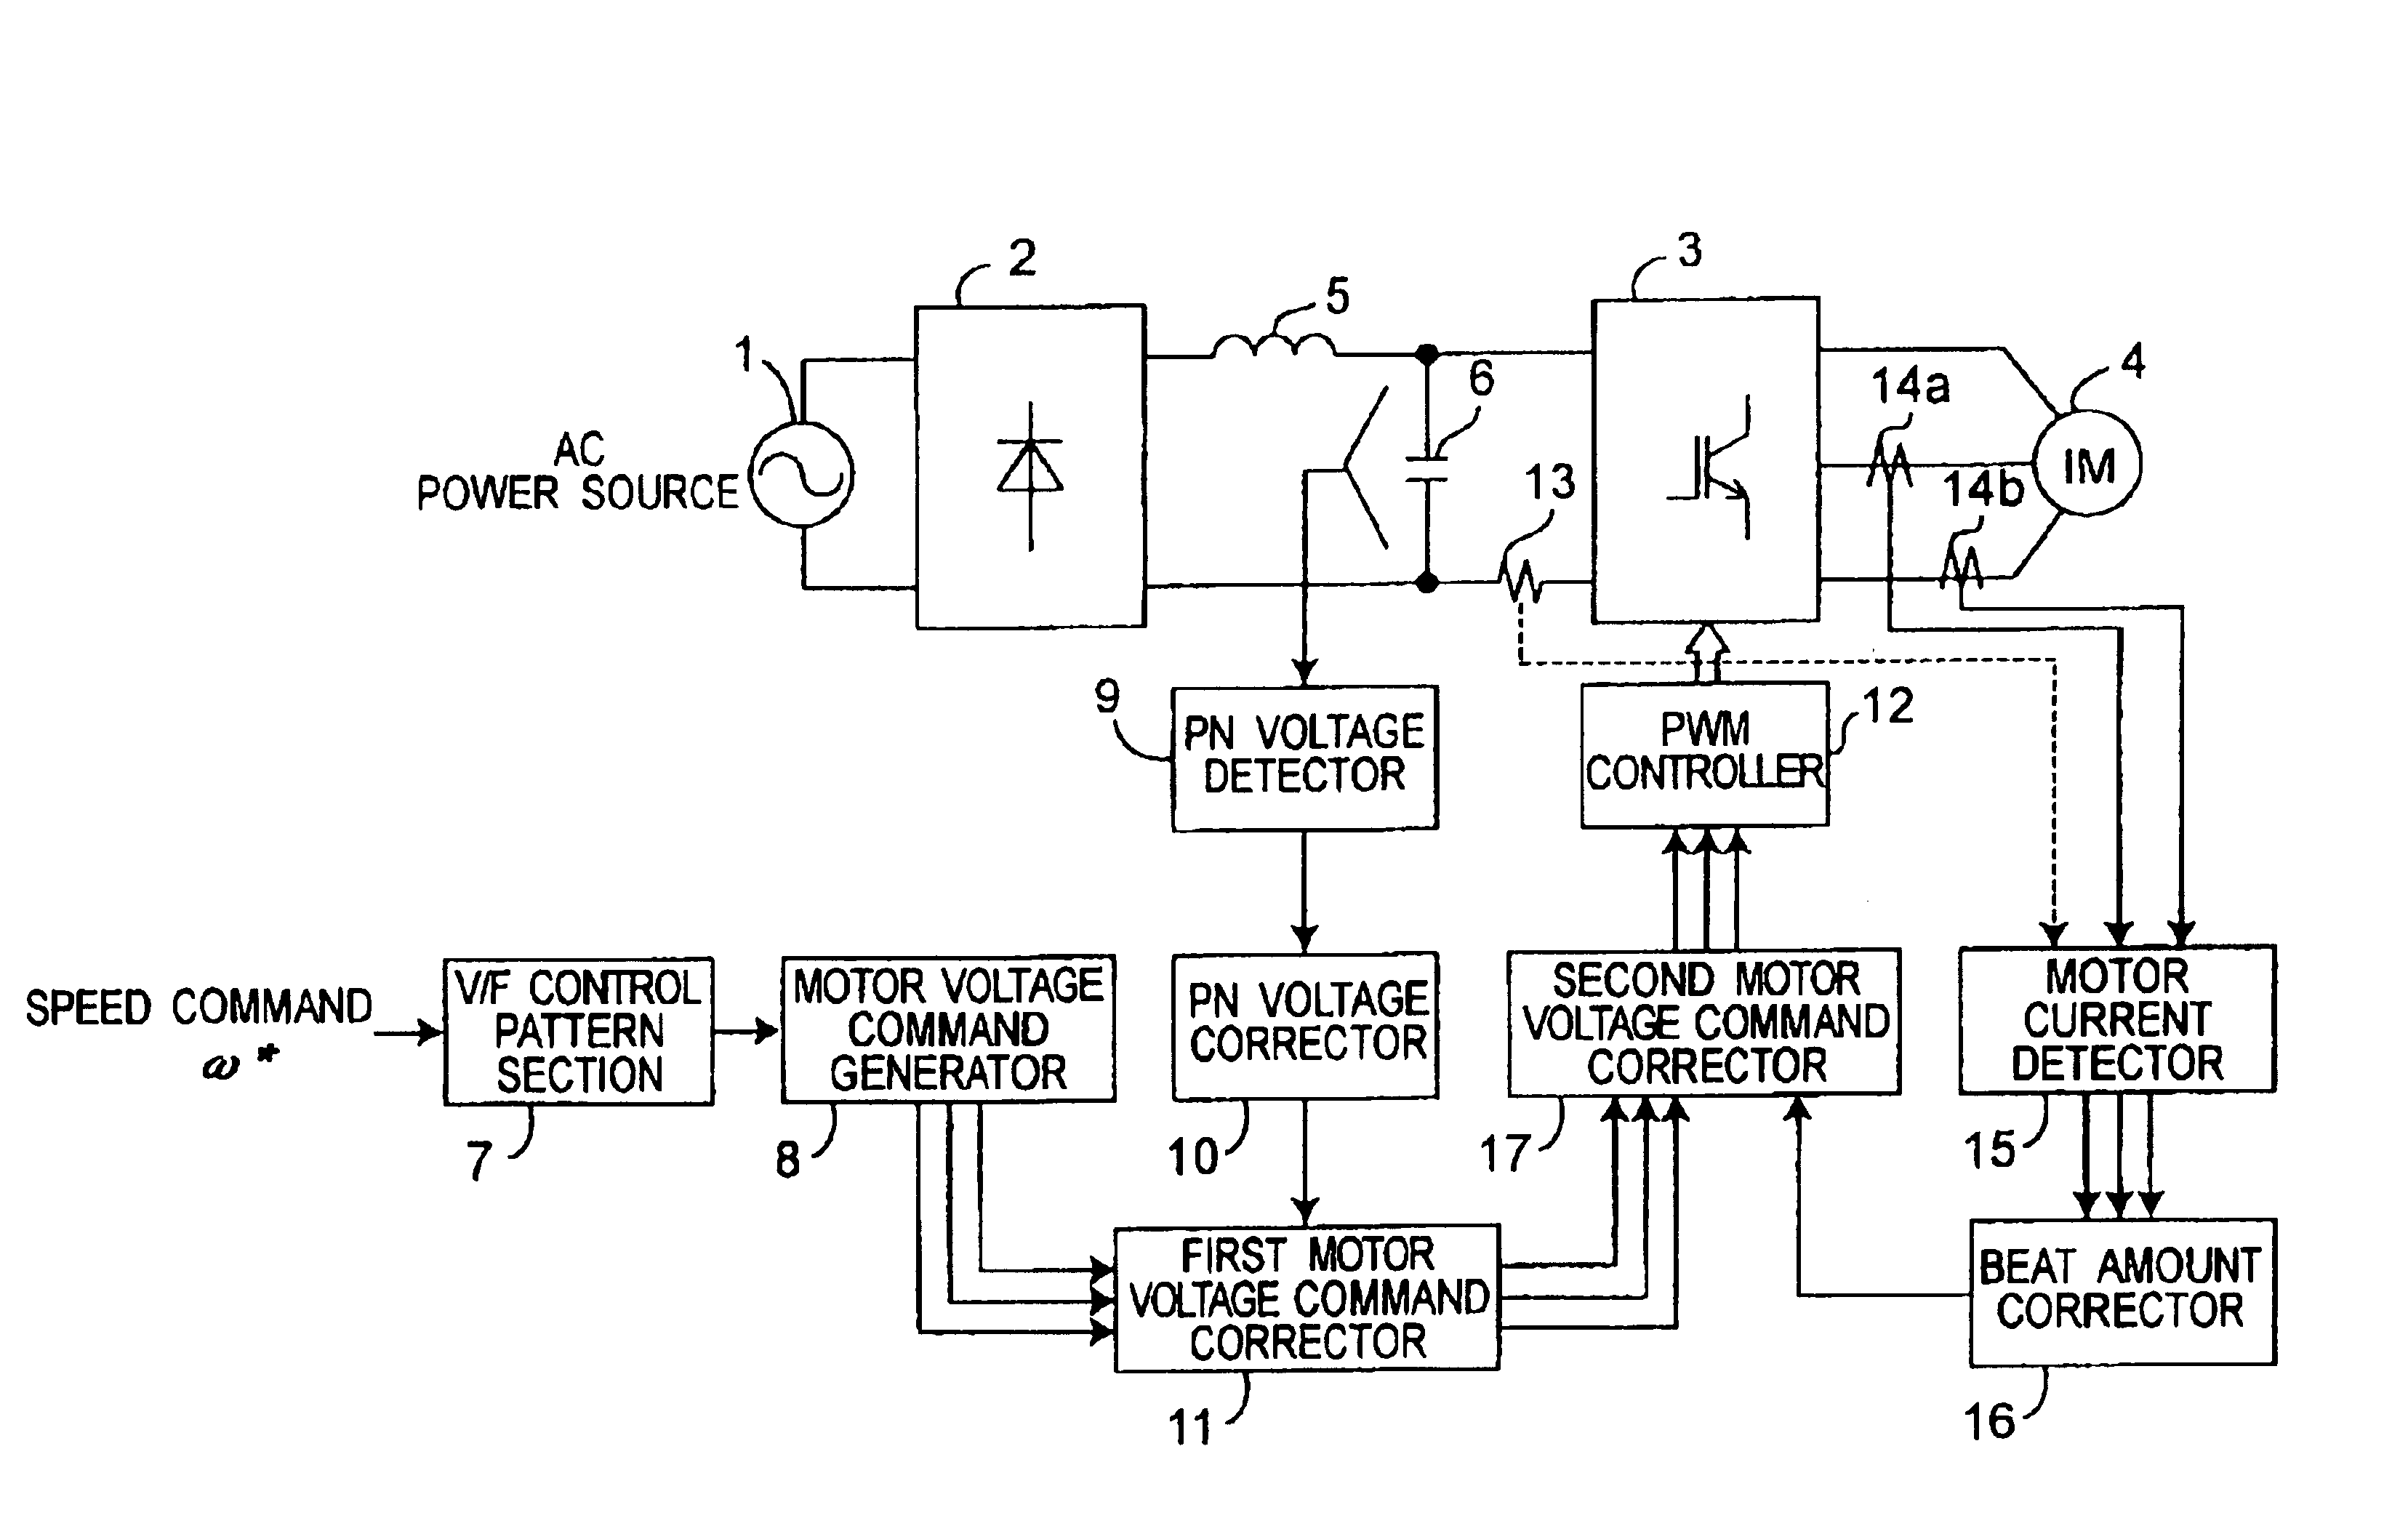 Inverter controller for driving motor and air conditioner using inverter controller